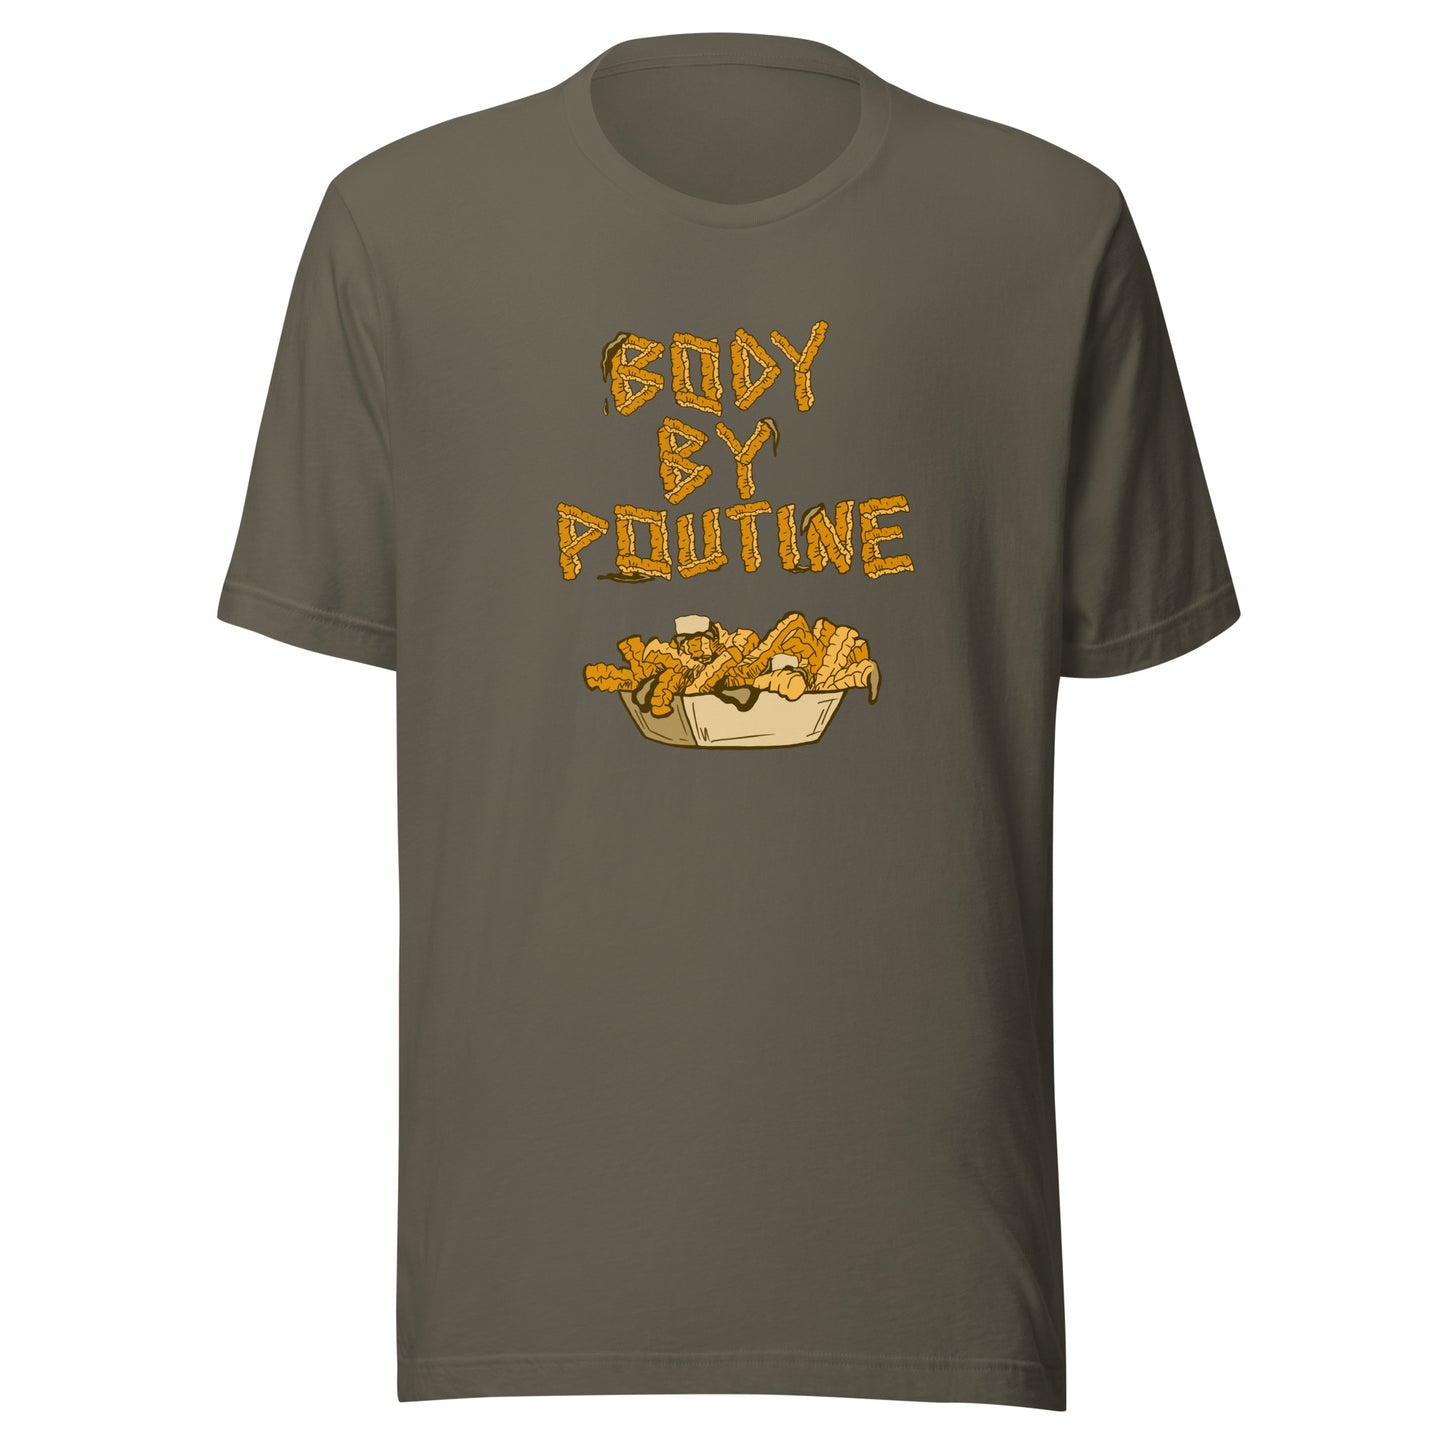 Body by Poutine Tee